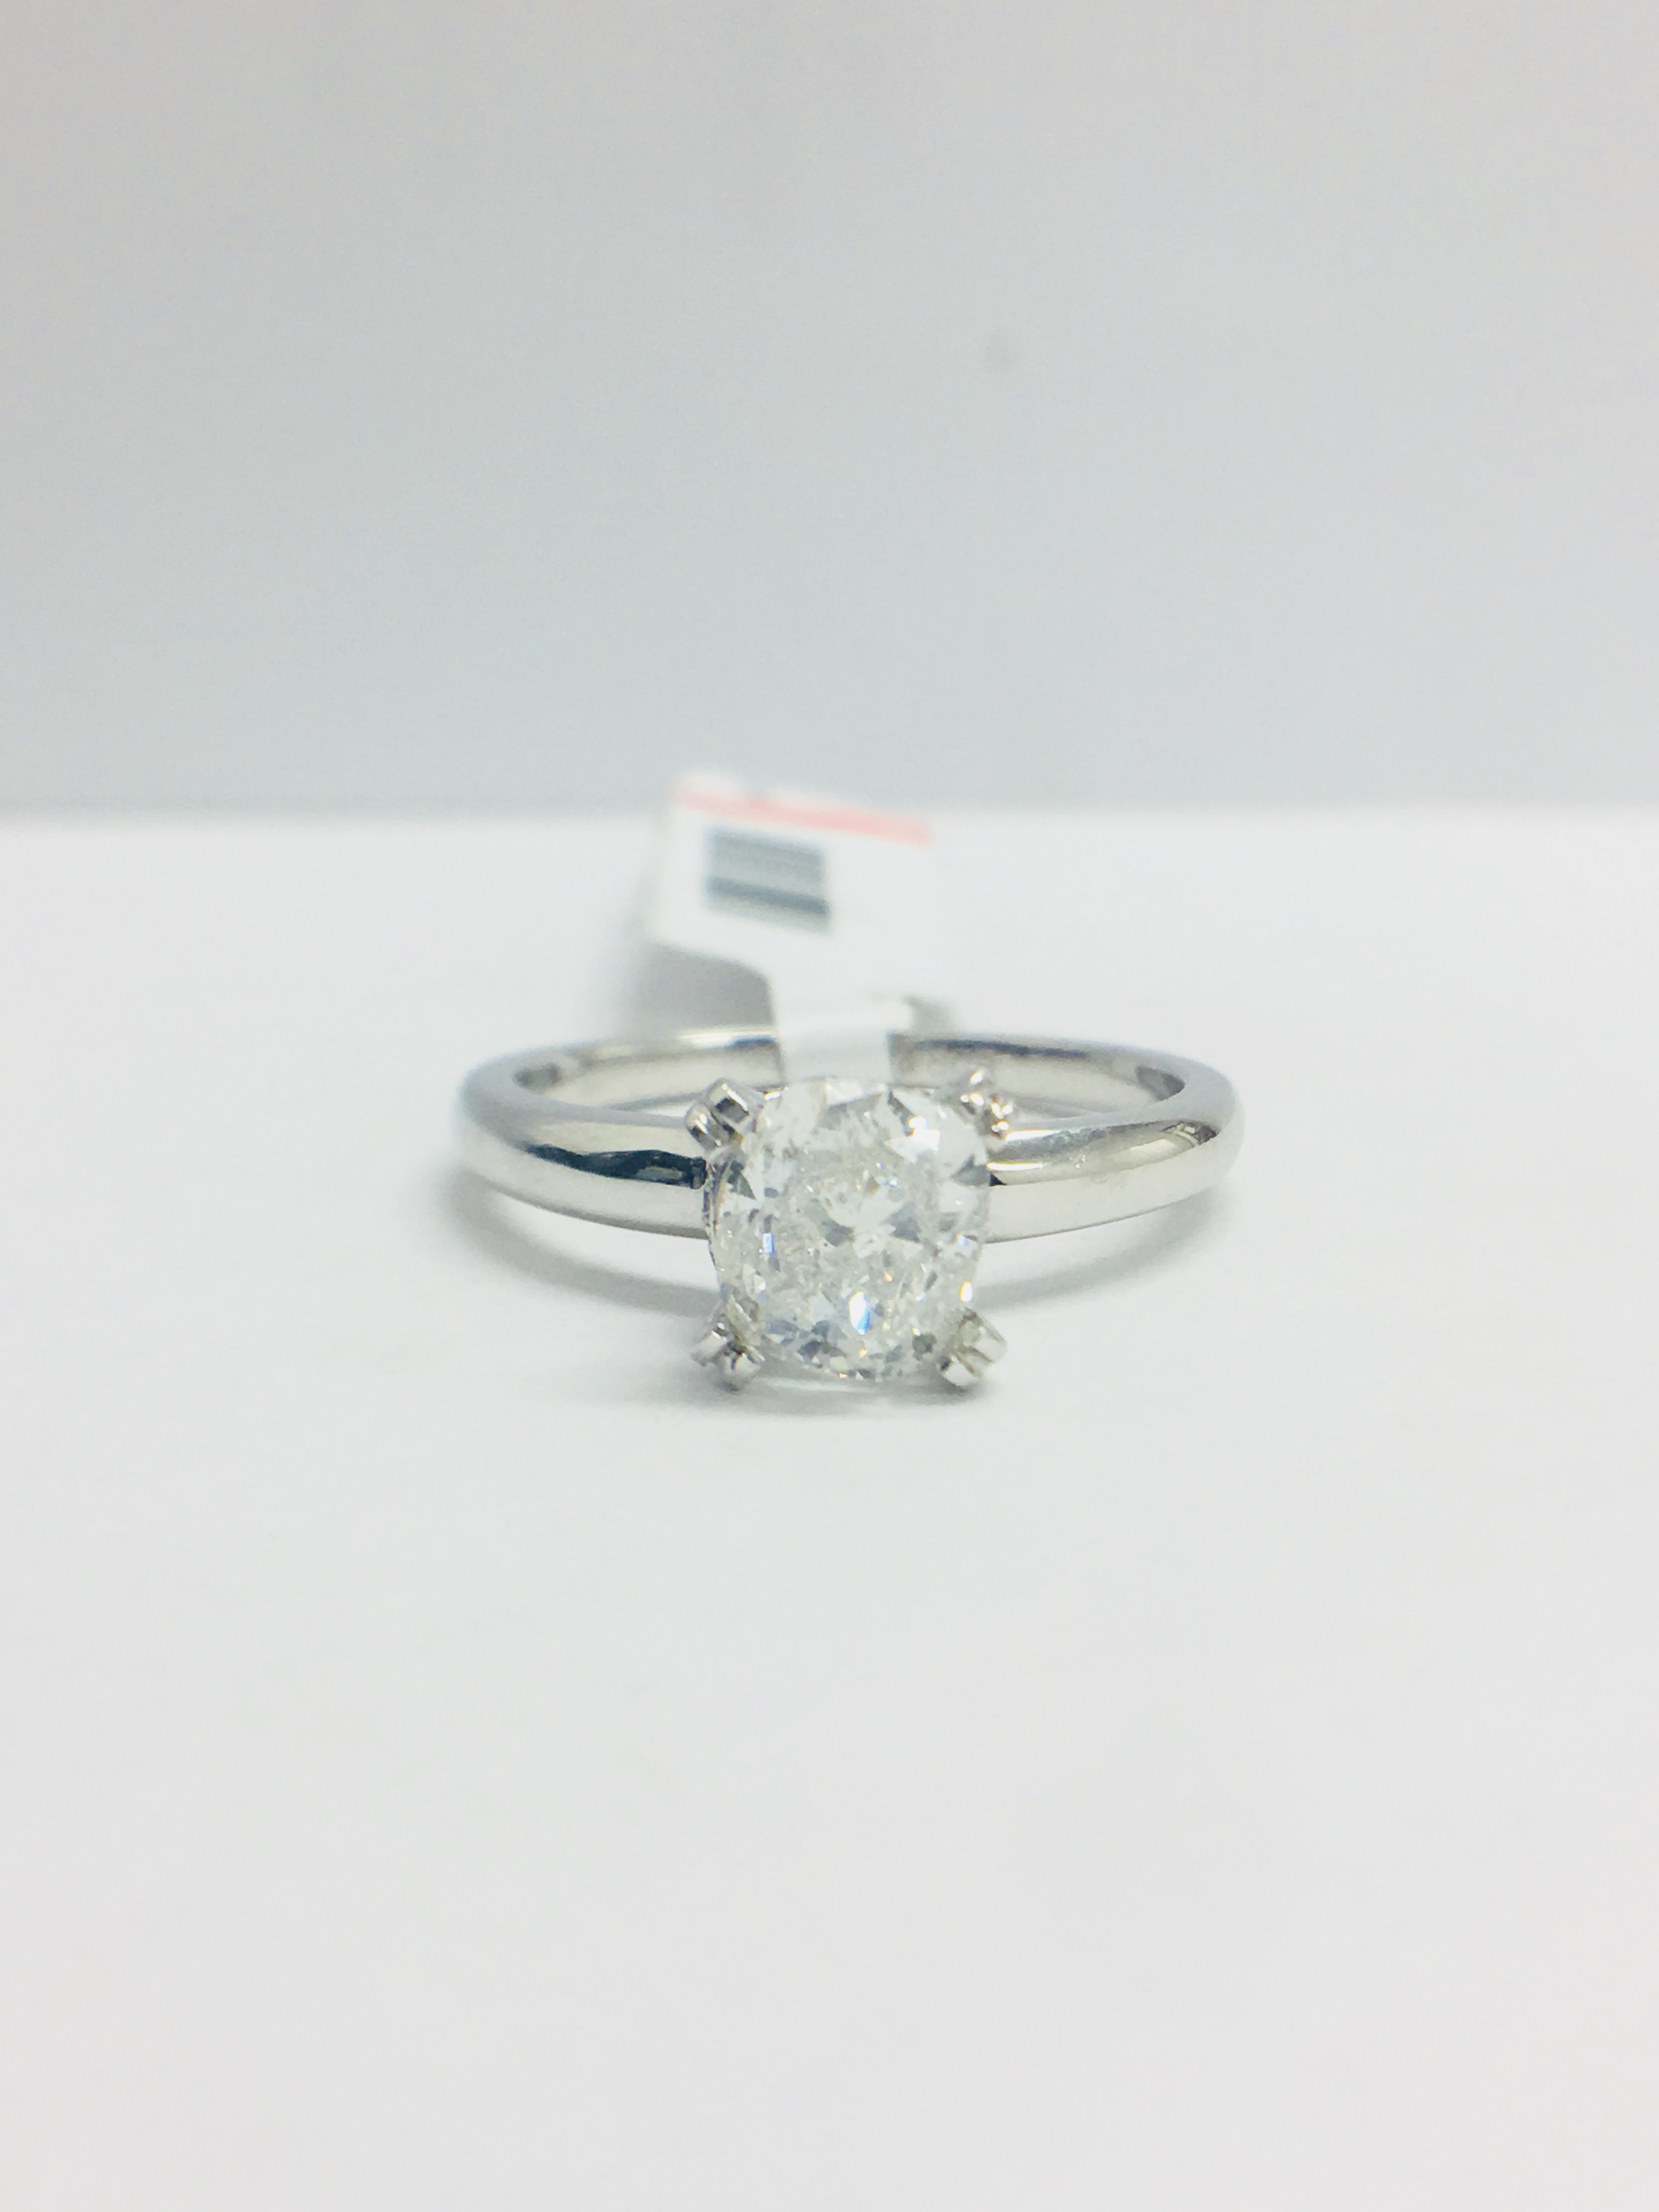 1Ct Cushion Cut Diamond Solitaire Ring In A Diamond Set Mount, - Image 11 of 11